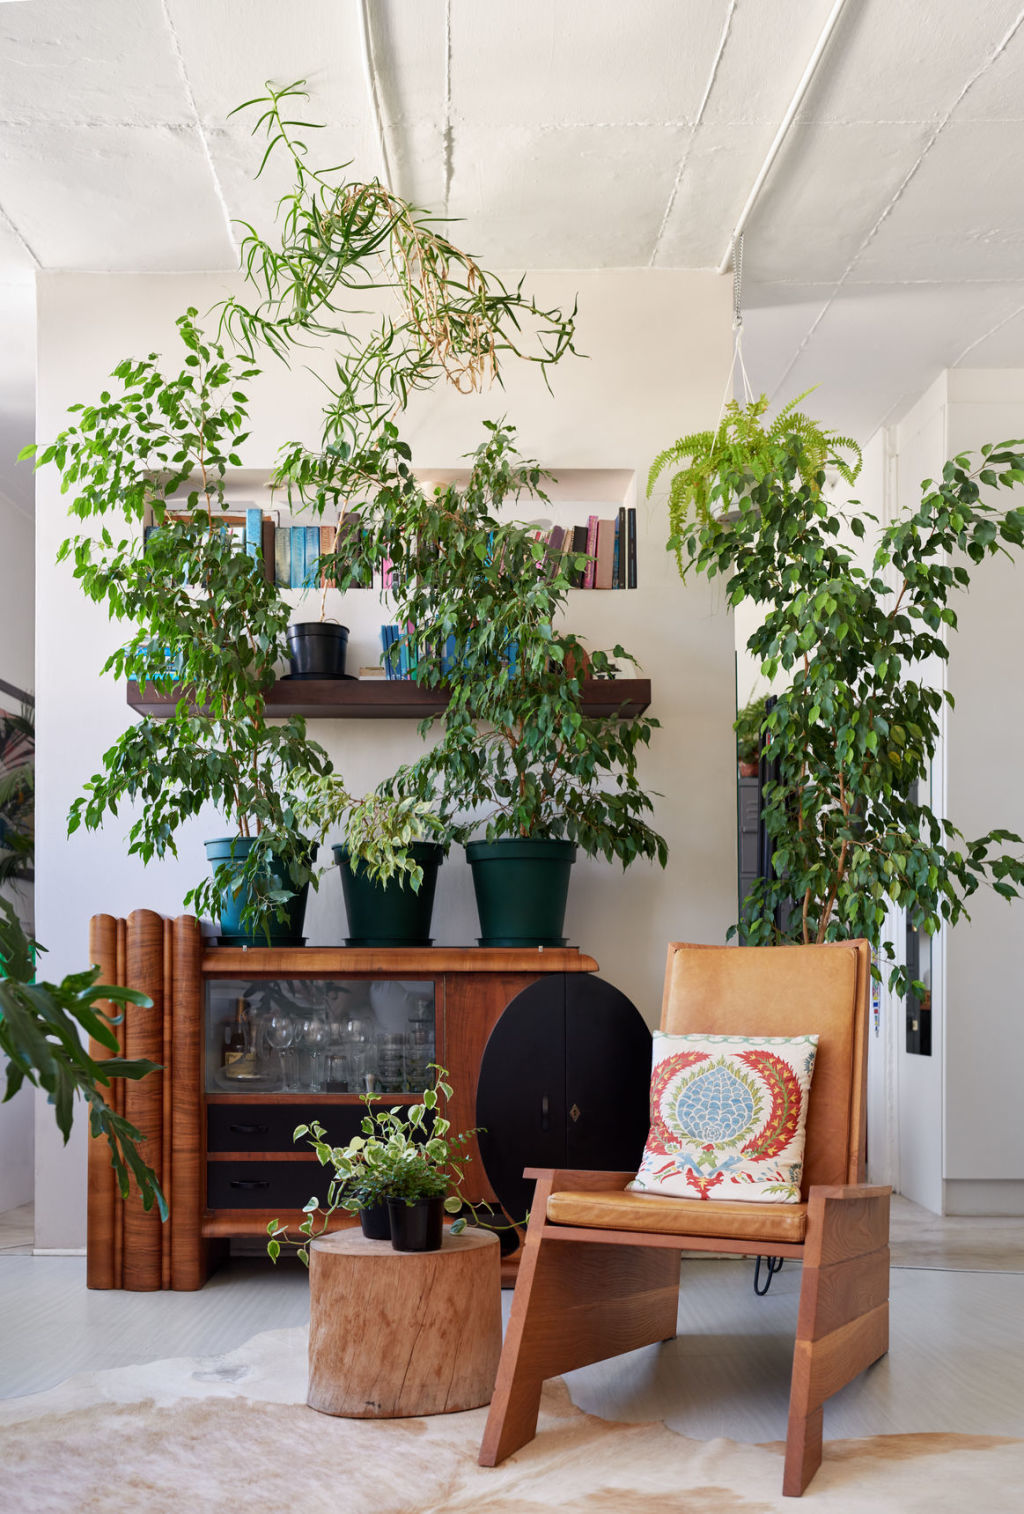 Plants can help shade the home from the heat. Photo: Stocksy